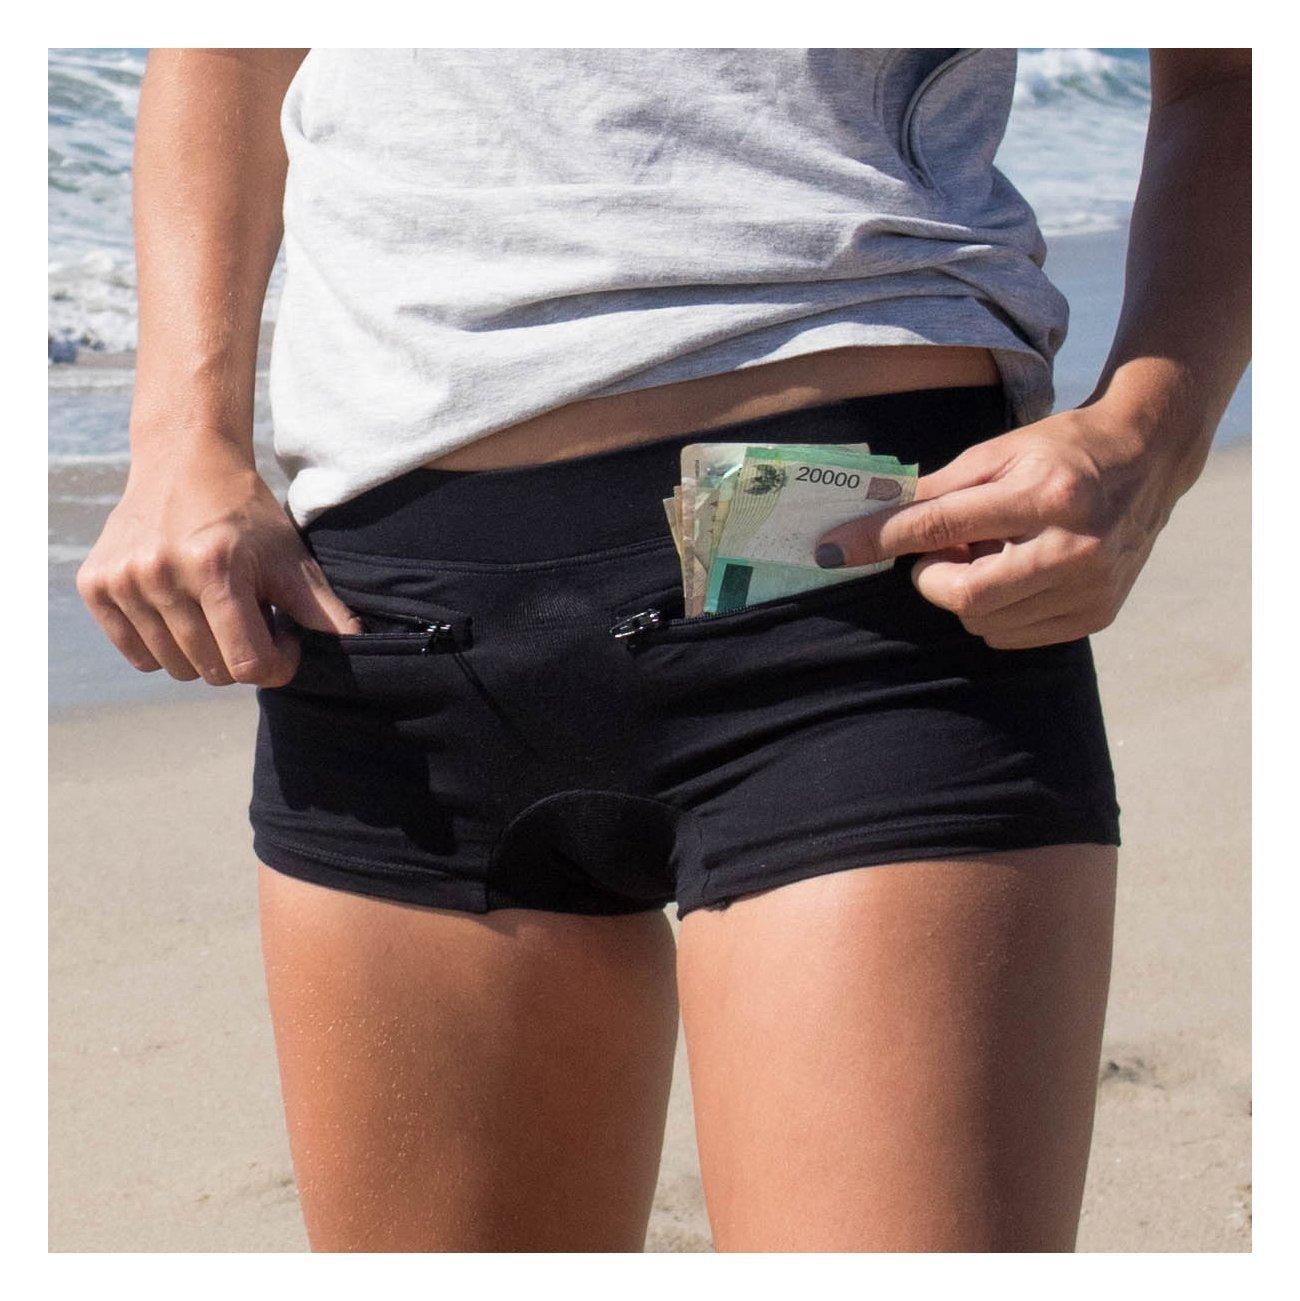 Women's travel safety gear: underwear with secret pockets – The Clever  Travel Company